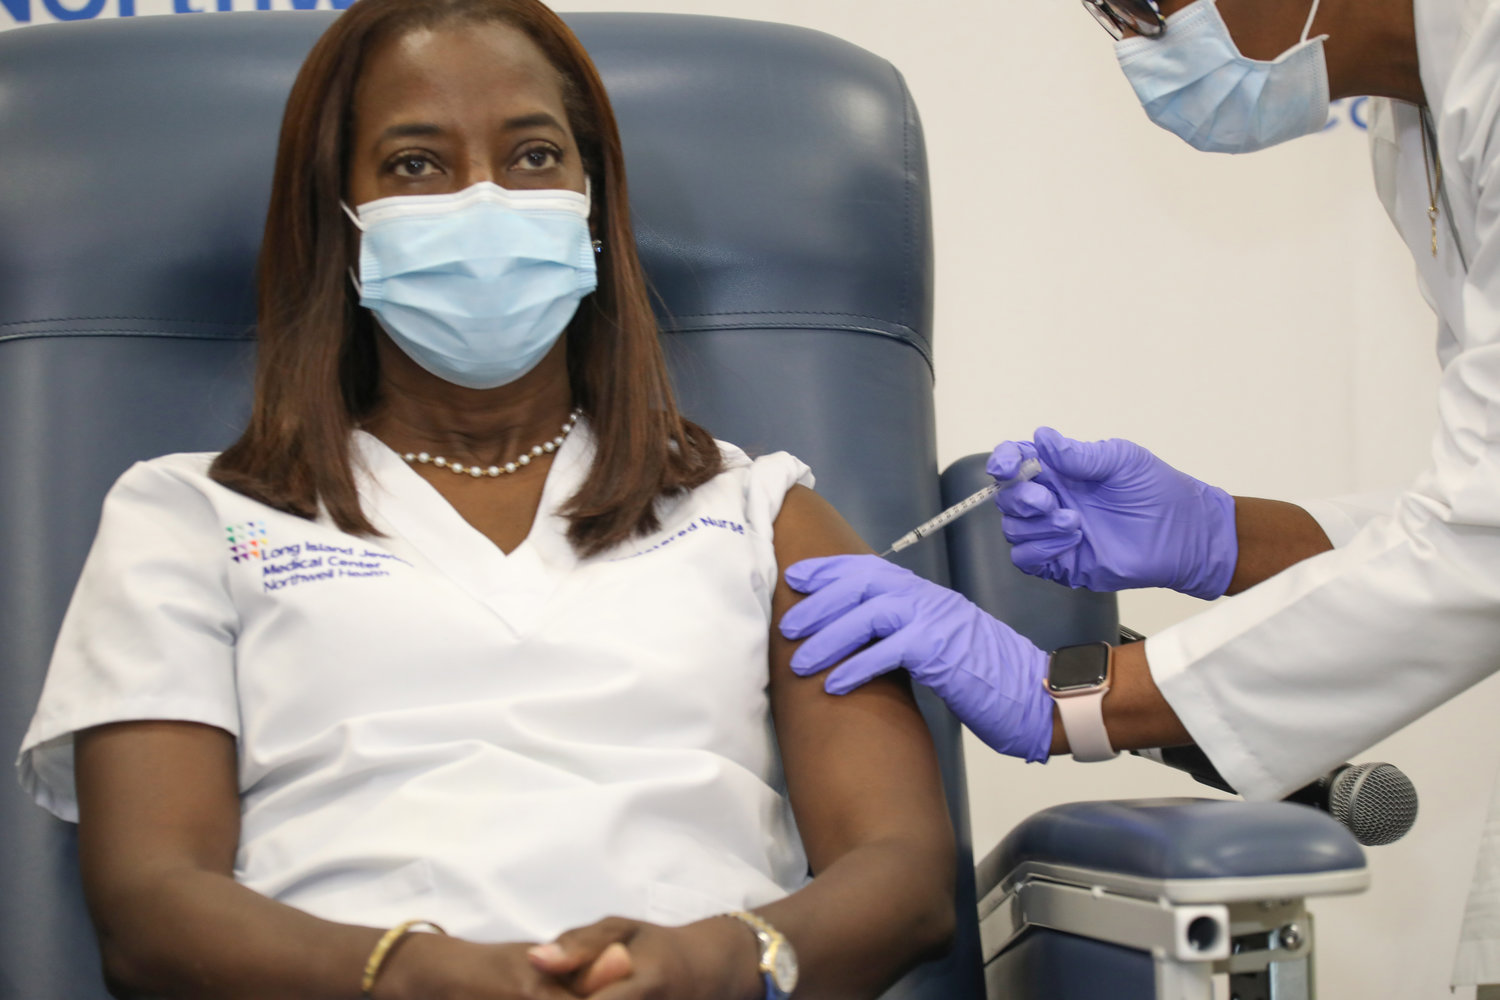 Northwell Health nurse Sandra Lindsay, of Port Washington, became the first person in New York state to receive Pfizer’s Covid-19 vaccine on Monday.